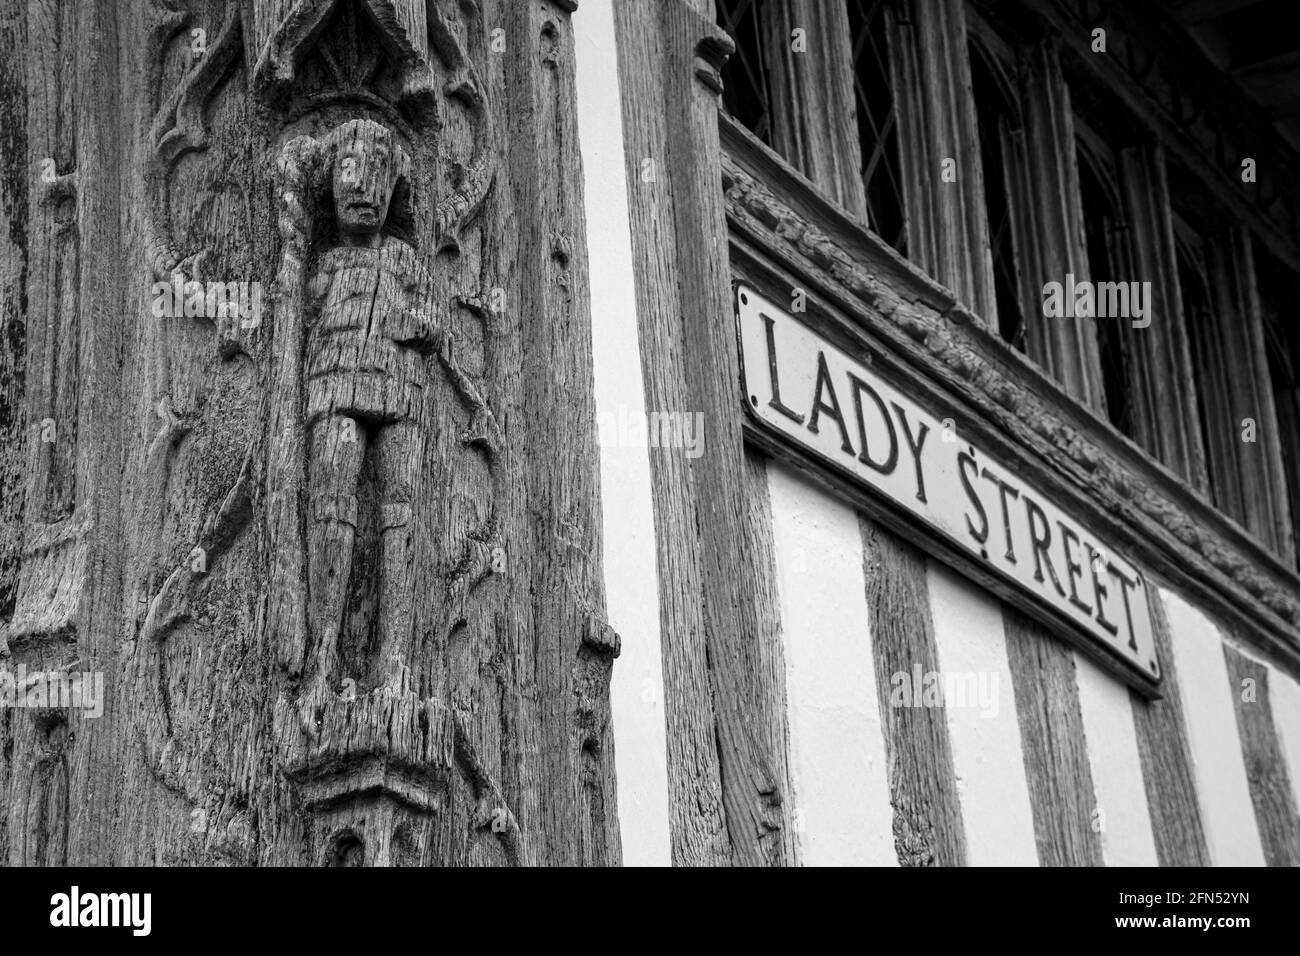 Lady Street sign on the side of the Guildhall building in Lavenham, Suffolk. Medieval timbered architecture. Stock Photo